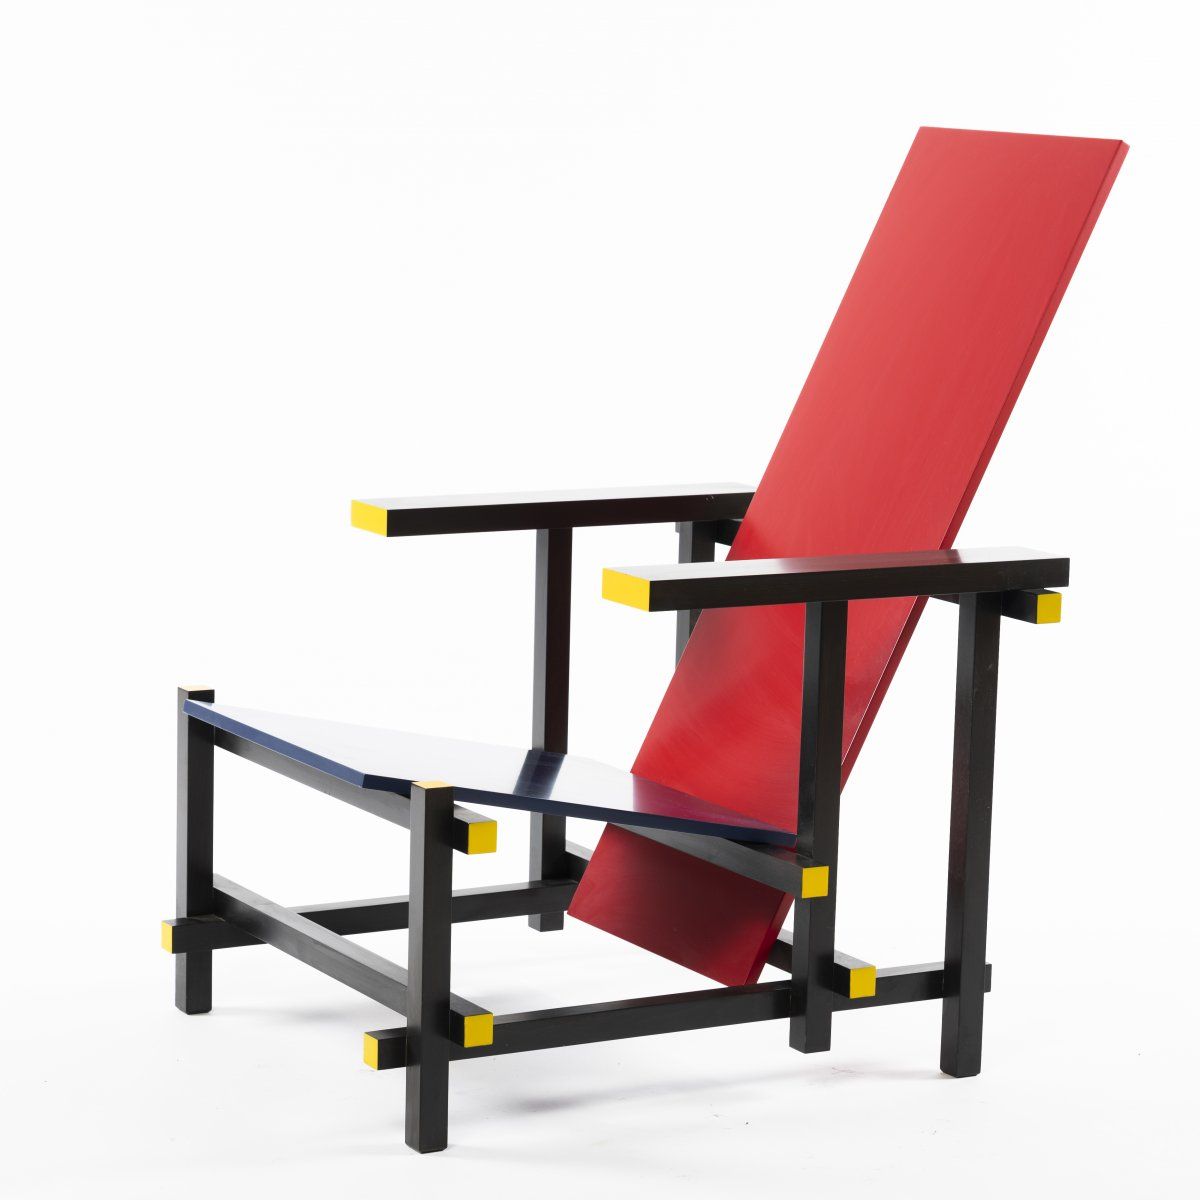 Null Gerrit Th. Rietveld , 'Red and Blue' chair, 1918, H. 88 x 65.5 x 82 cm. Mad&hellip;